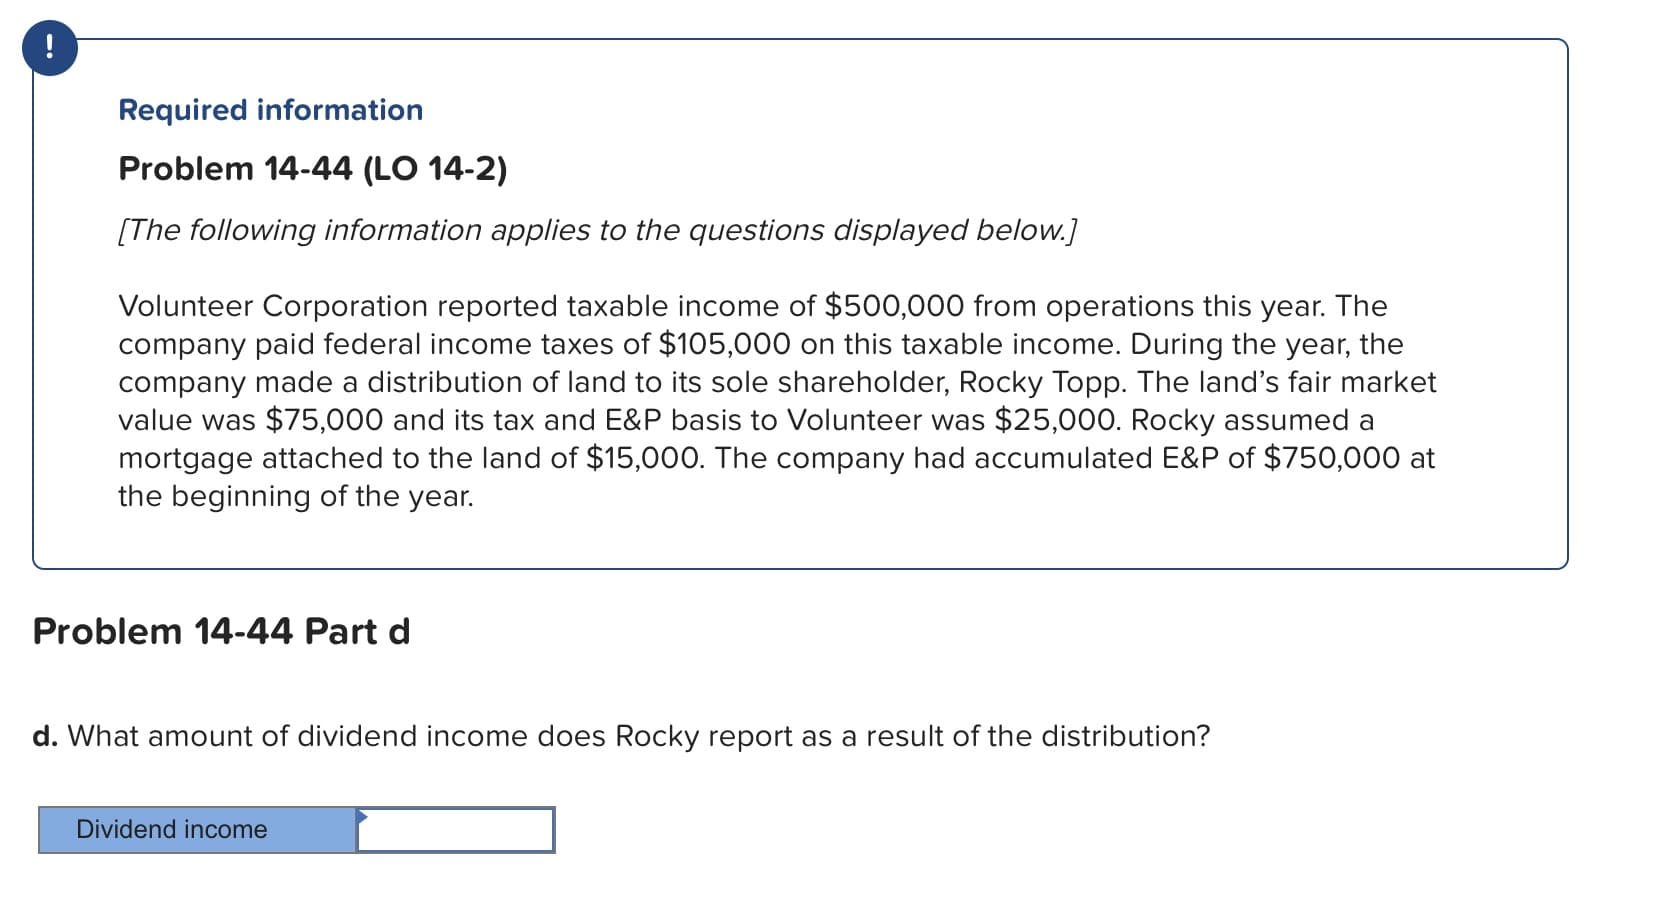 Required information
Problem 14-44 (LO 14-2)
[The following information applies to the questions displayed below.
Volunteer Corporation reported taxable income of $500,000 from operations this year. The
company paid federal income taxes of $105,000 on this taxable income. During the year, the
company made a distribution of land to its sole shareholder, Rocky Topp. The land's fair market
value was $75,000 and its tax and E&P basis to Volunteer was $25,000. Rocky assumed a
mortgage attached to the land of $15,000. The company had accumulated E&P of $750,000 at
the beginning of the year.
Problem 14-44 Part d
d. What amount of dividend income does Rocky report as a result of the distribution?
Dividend income
